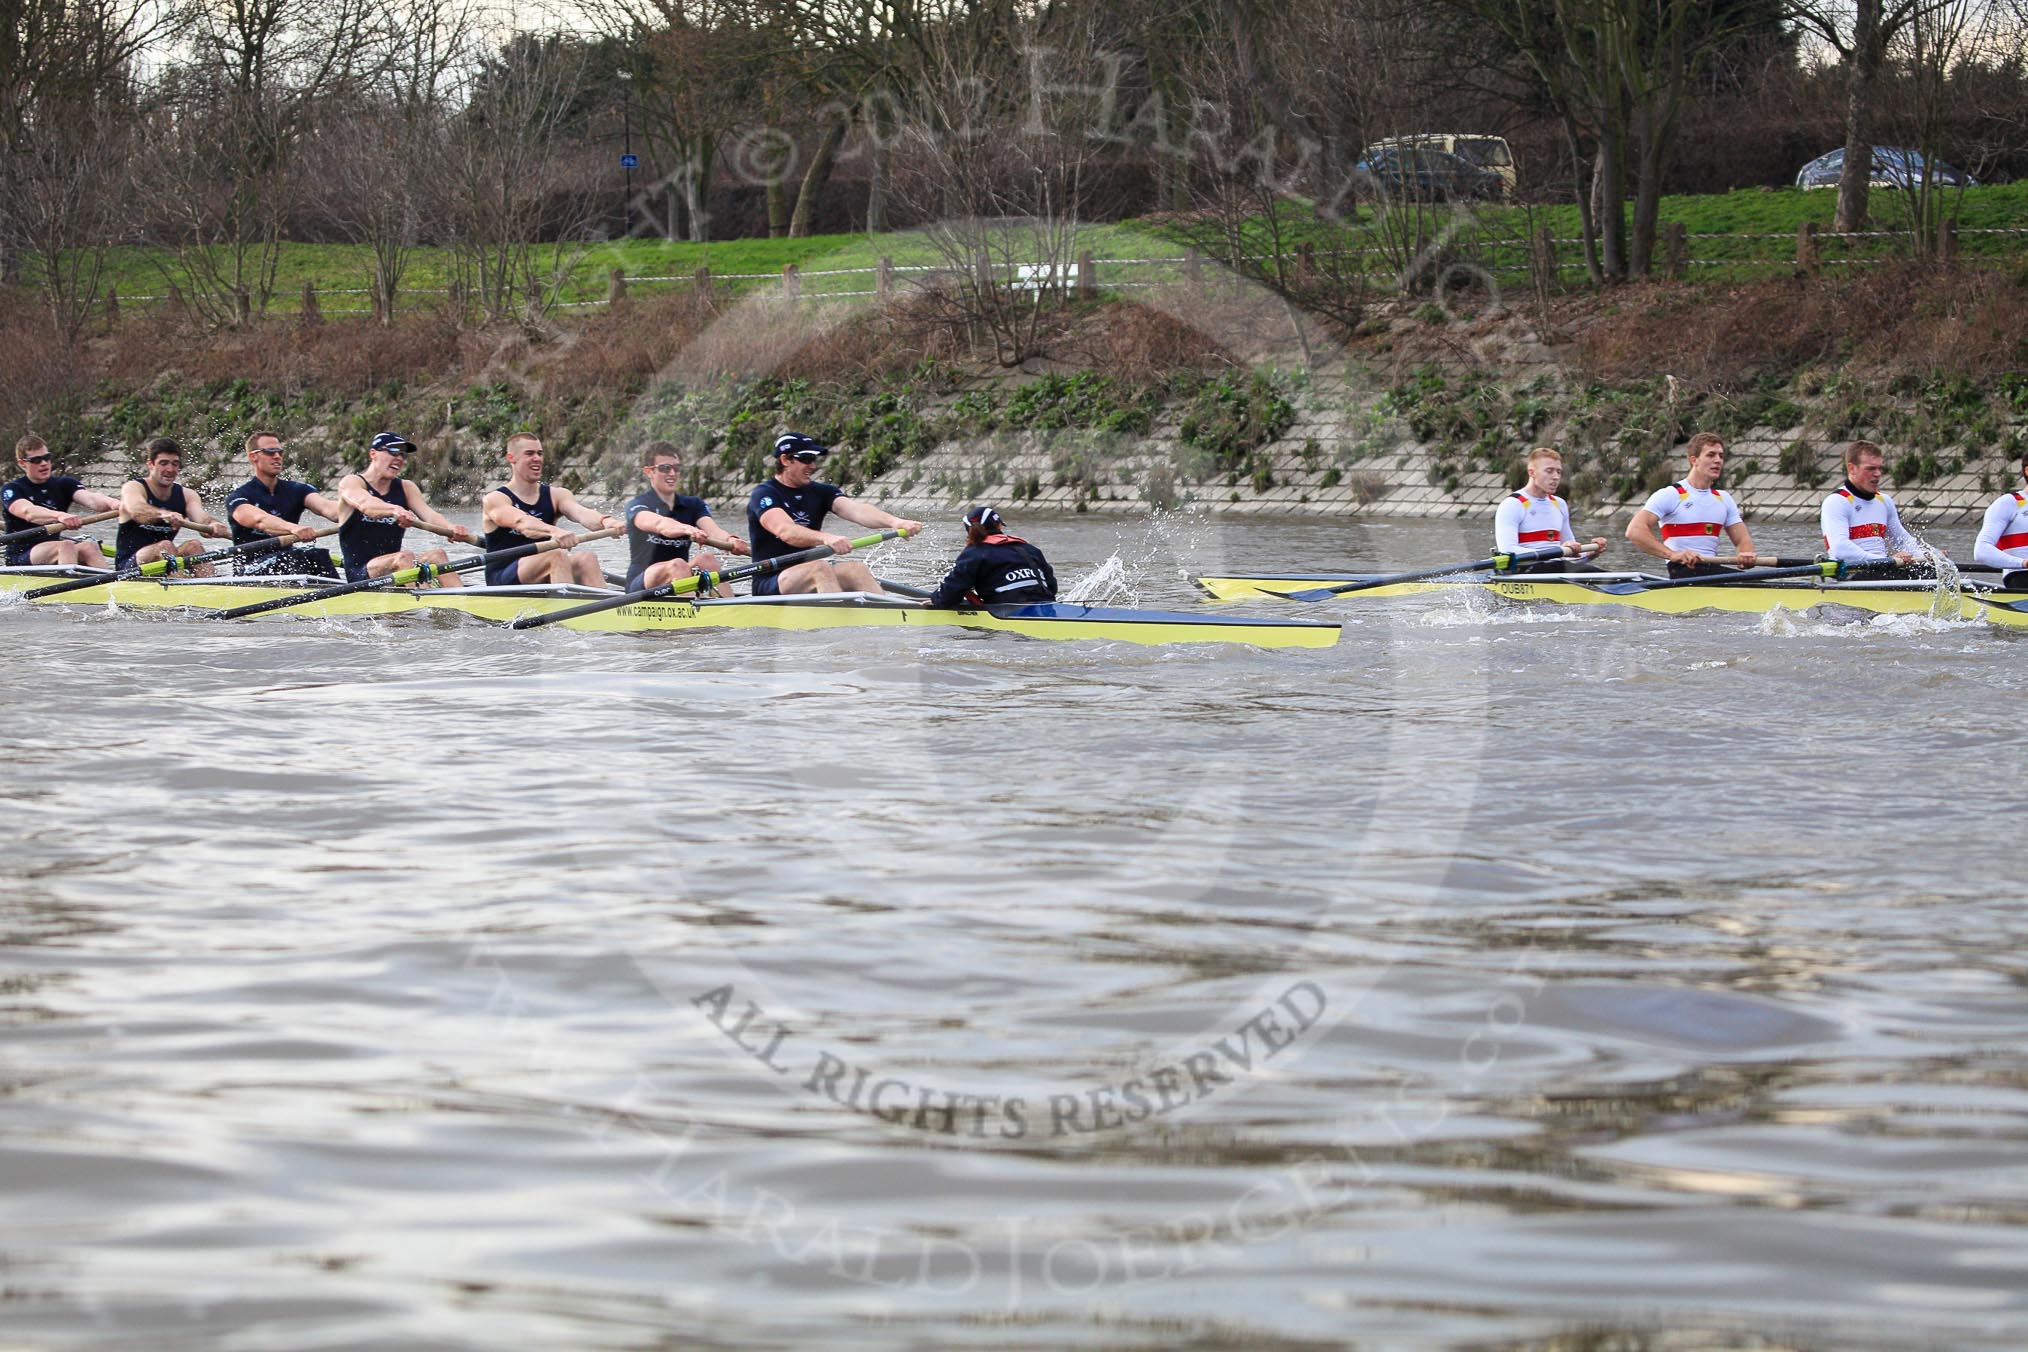 The Boat Race season 2012 - fixture OUBC vs German U23: After winning the second race - the Oxford Blue Boat in front, the German U23 boat behind, at Mortlake..
River Thames between Putney and Mortlake,
London,

United Kingdom,
on 26 February 2012 at 15:52, image #104